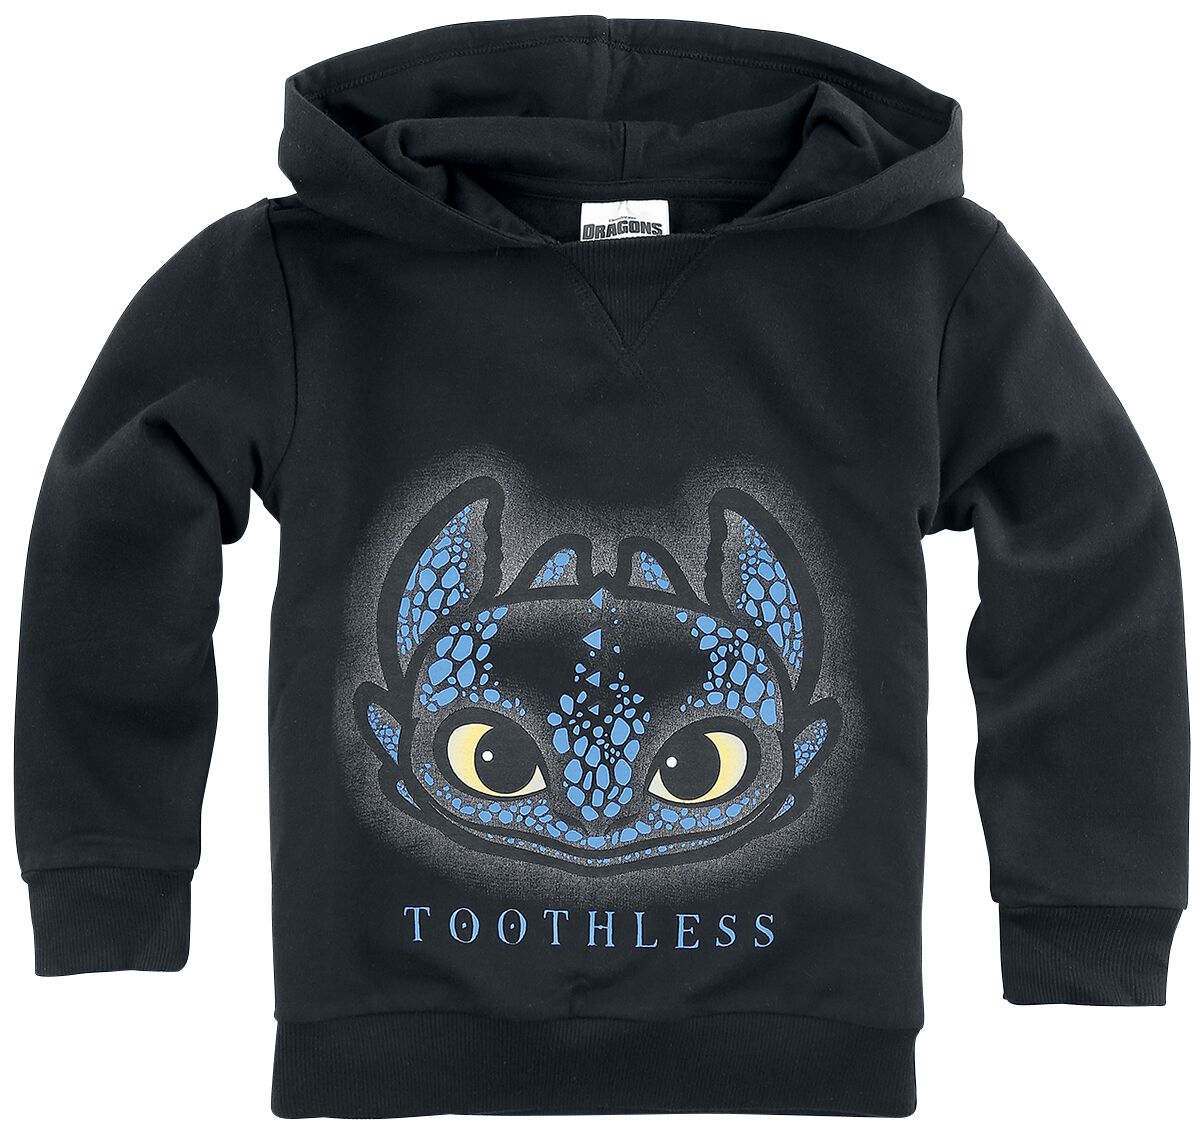 How to Train Your Dragon Kids - Toothless Hoodie Sweater black